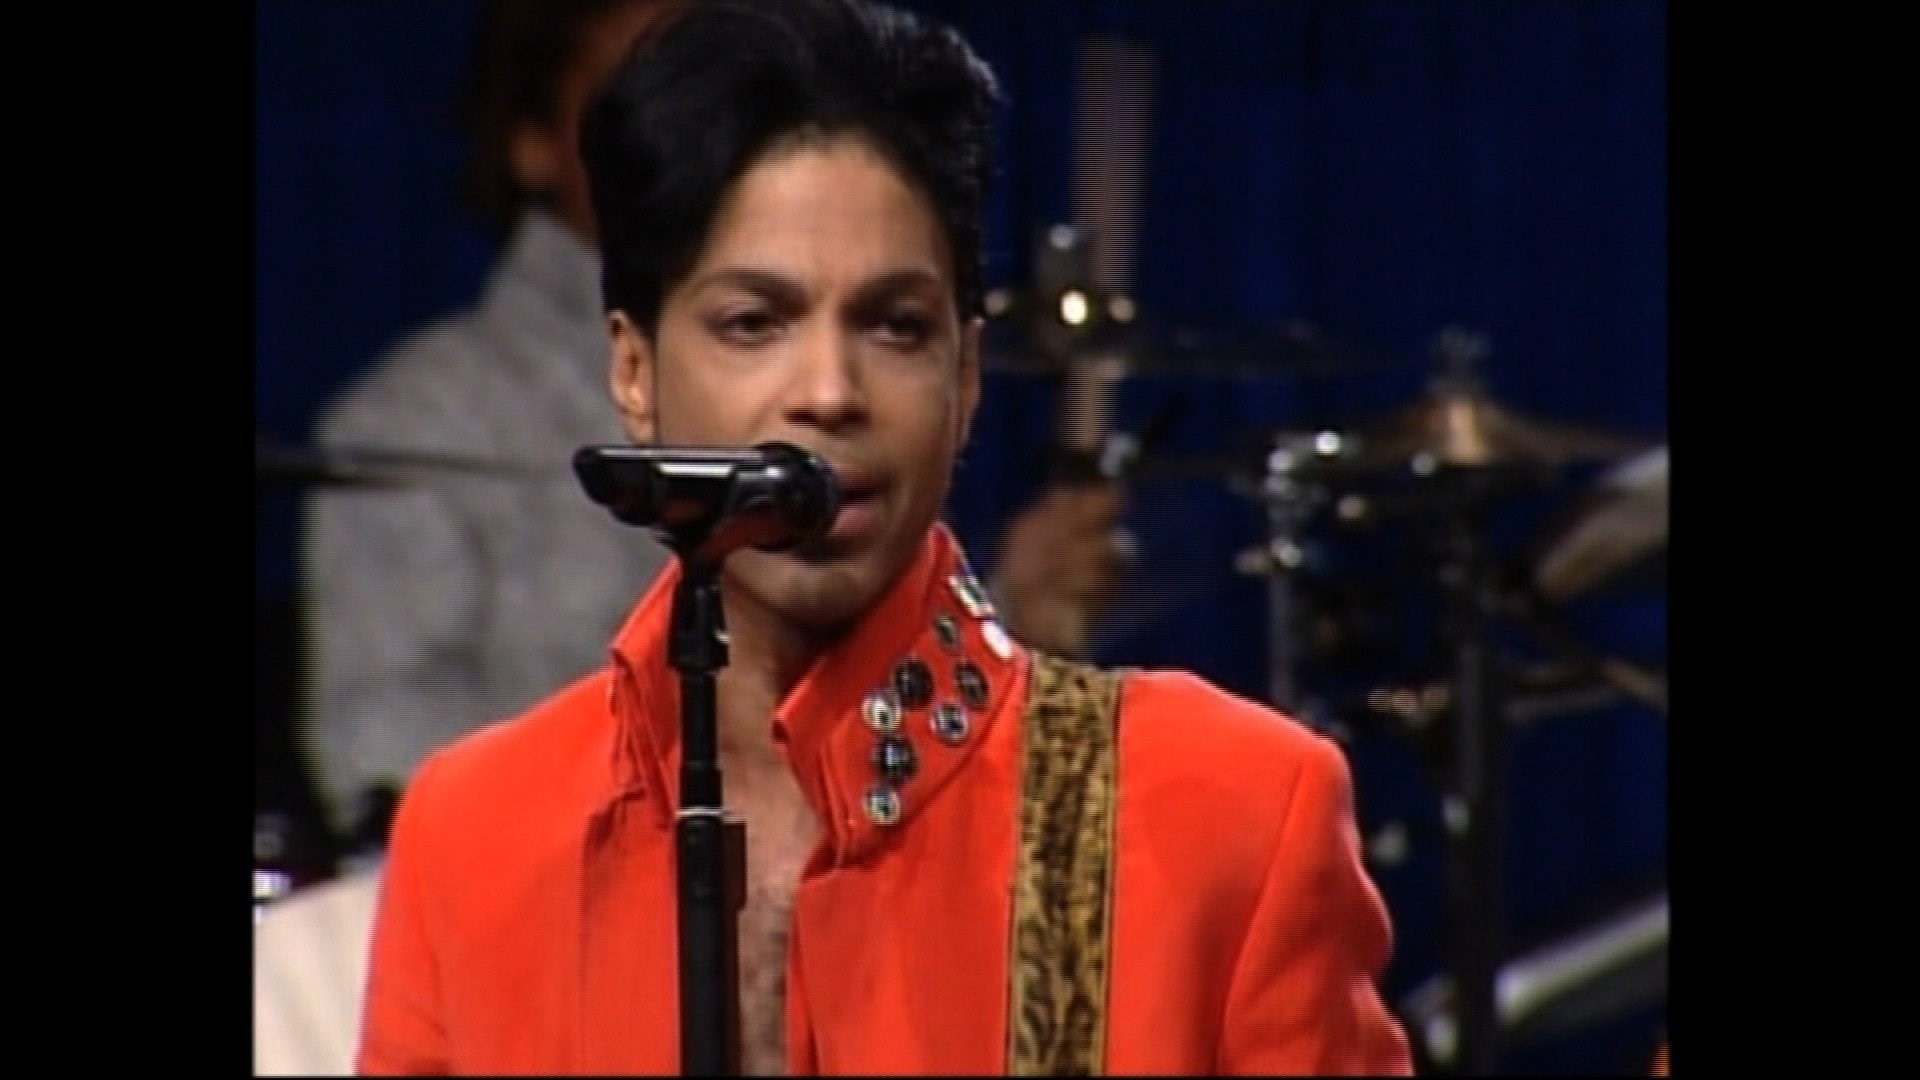 1920x1080 Musician Prince performs at a show in Miami, Florida.